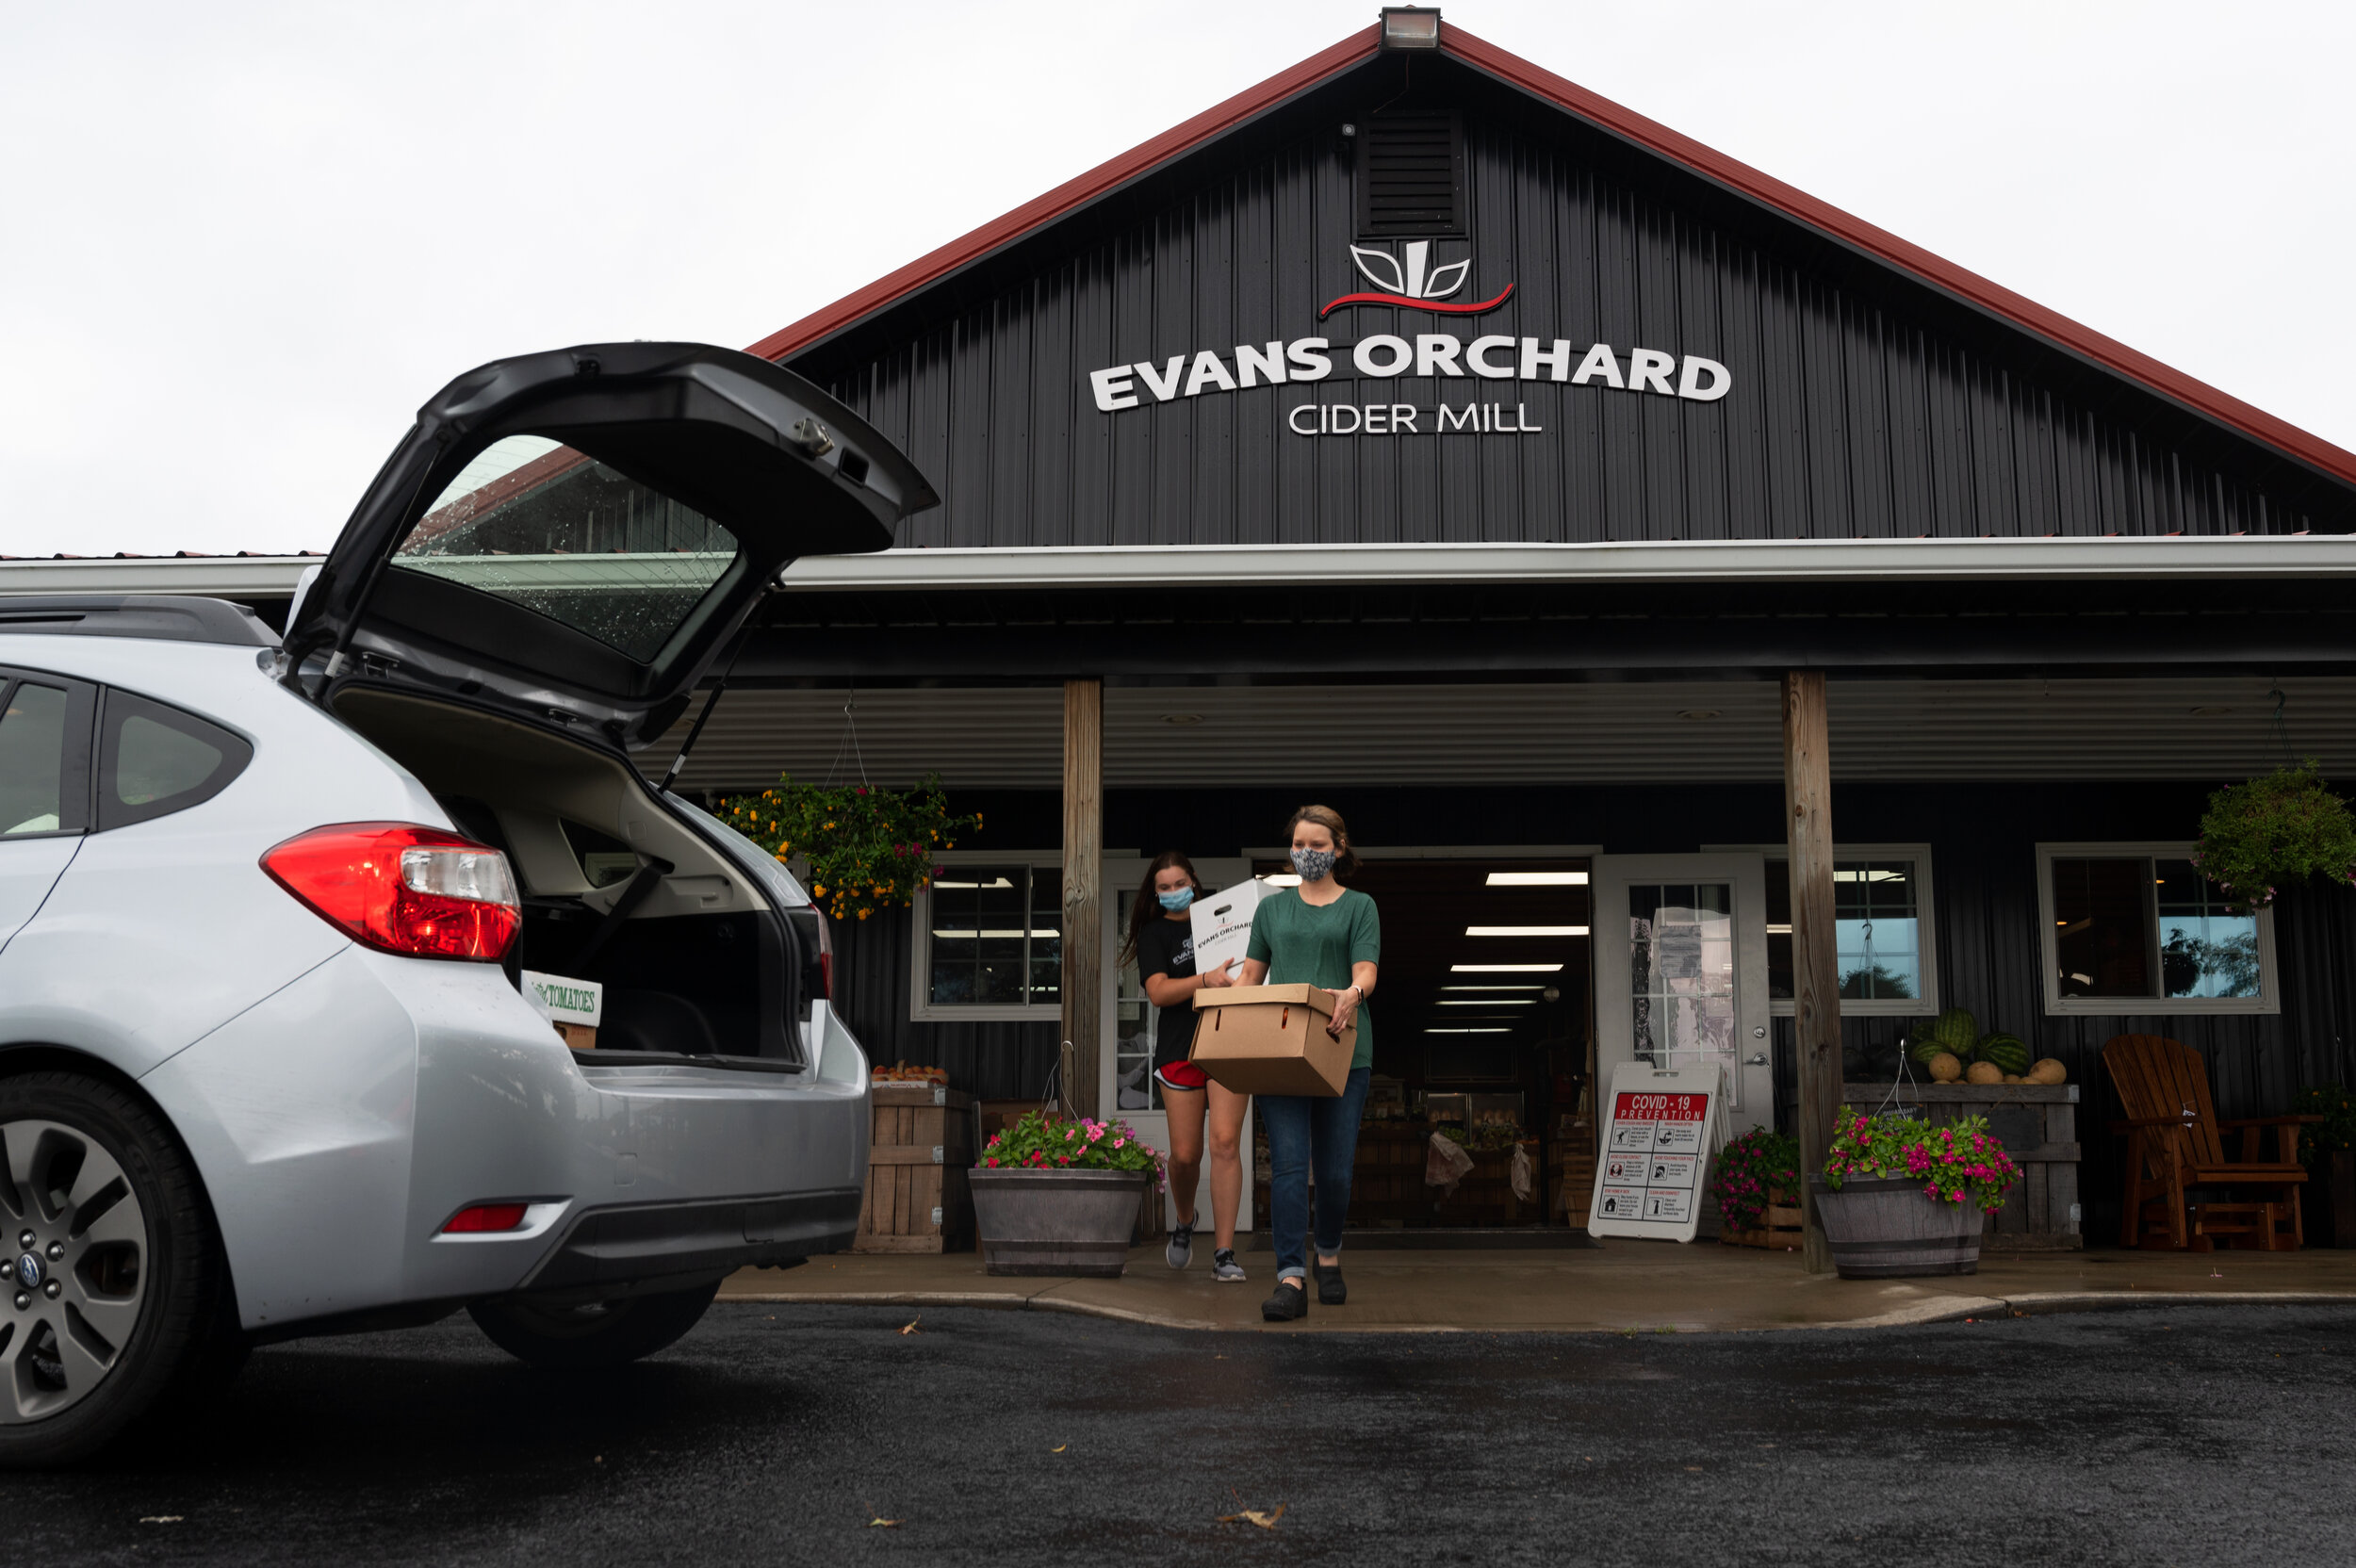  Evans Orchard is one of four farms that Karey Riddell frequents on a weekly basis to source items for The Burley Market and Cafe. 